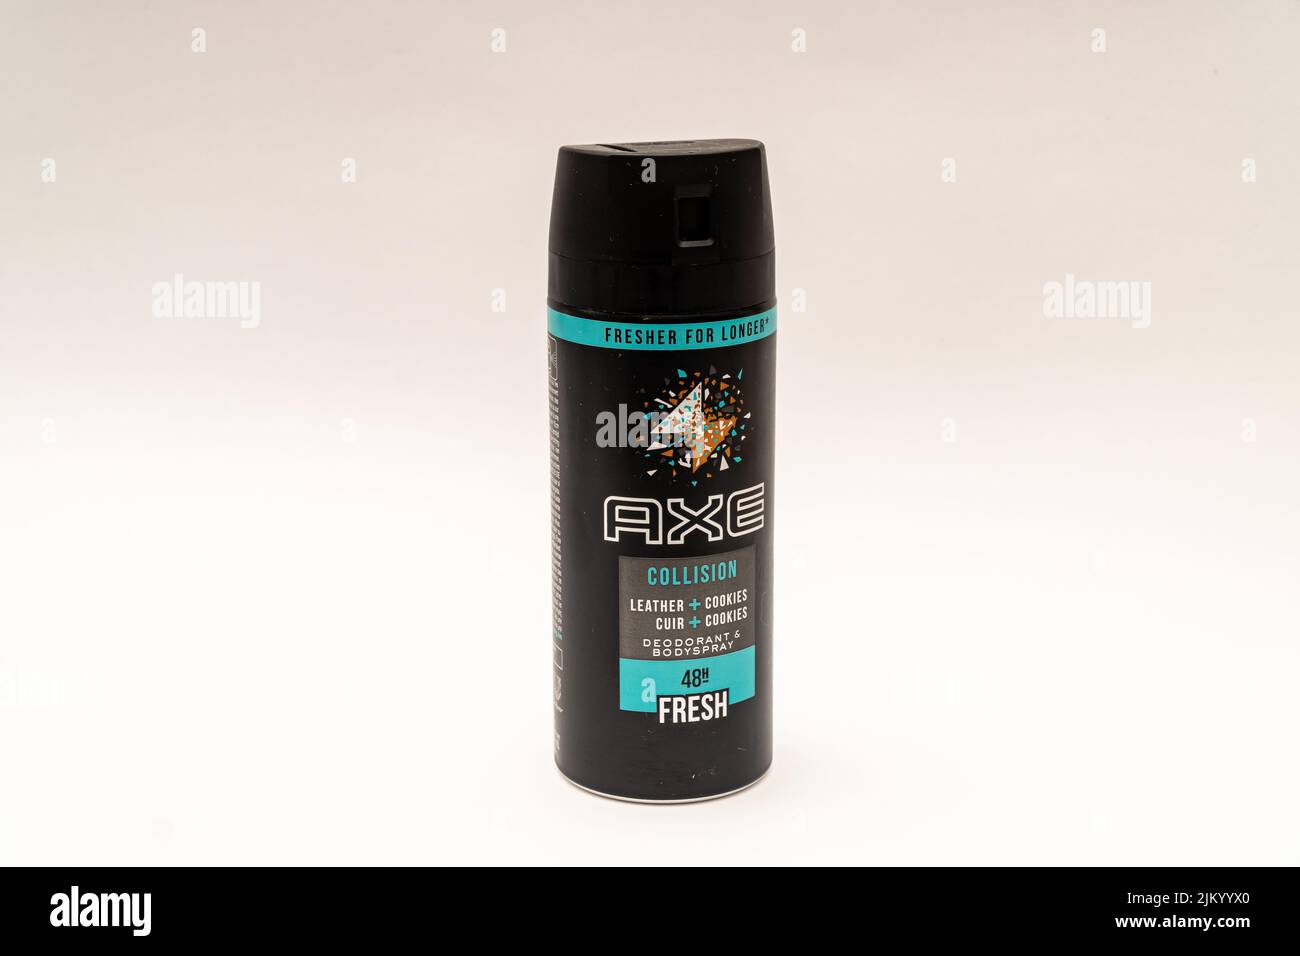 Axe deodorant hi-res photography images - Alamy